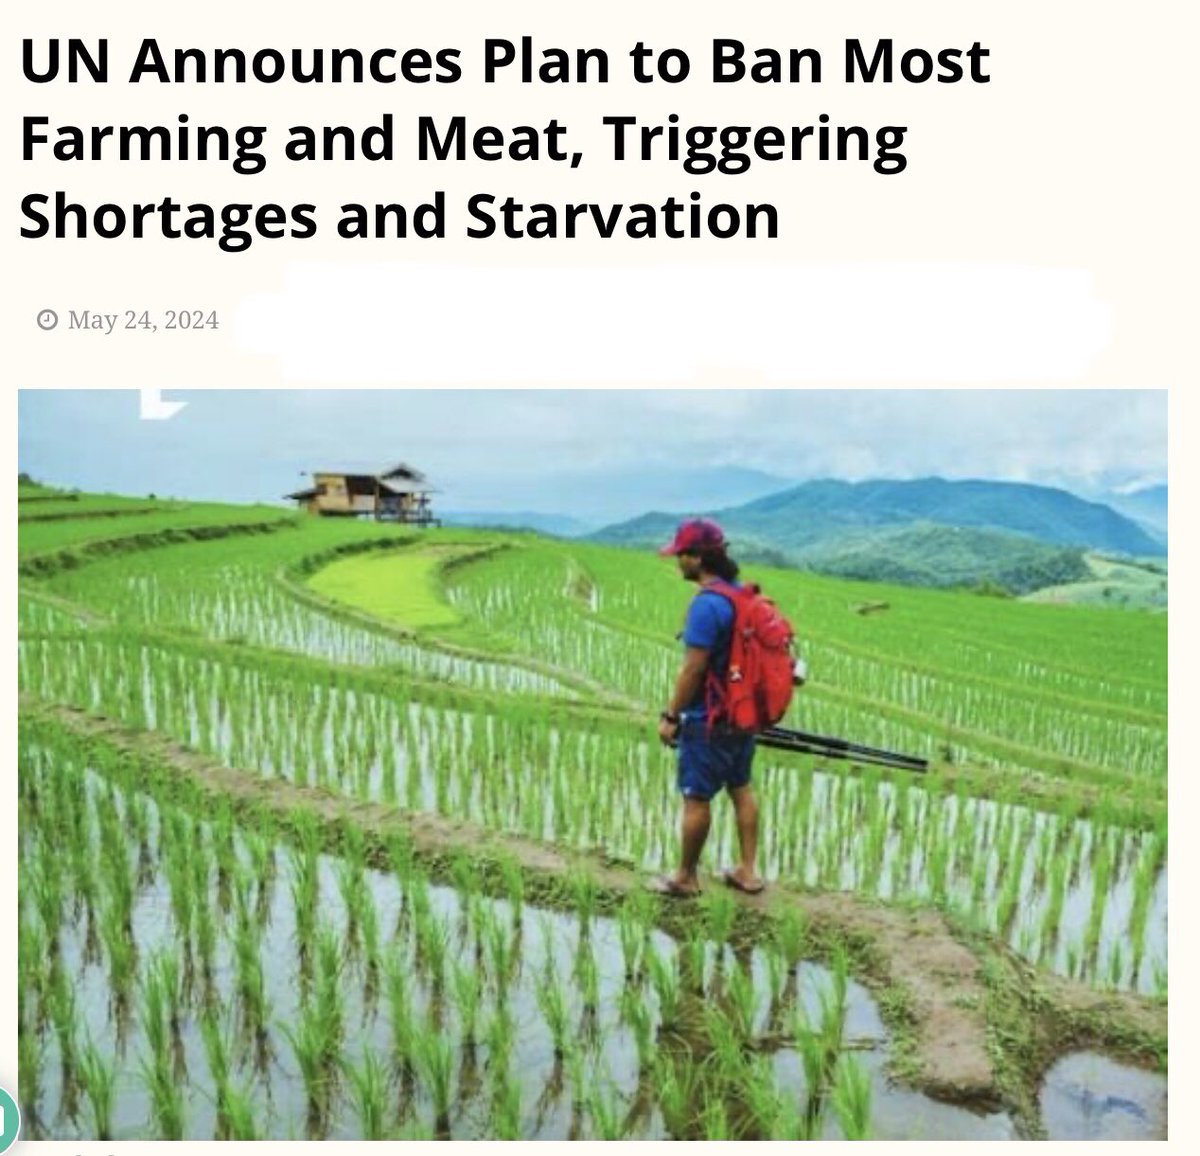 FYI - #JustinTrudeau, a #WEF treasonous traitor, is planning to destroy the livelihoods of #Canadian #farmers…as per his instructions from the far left radicals at the #UN! #TrudeauMustGo #TrudeauForTreason #CarbonTax #ClimateScam

needtoknow.news/2024/05/un-ann…